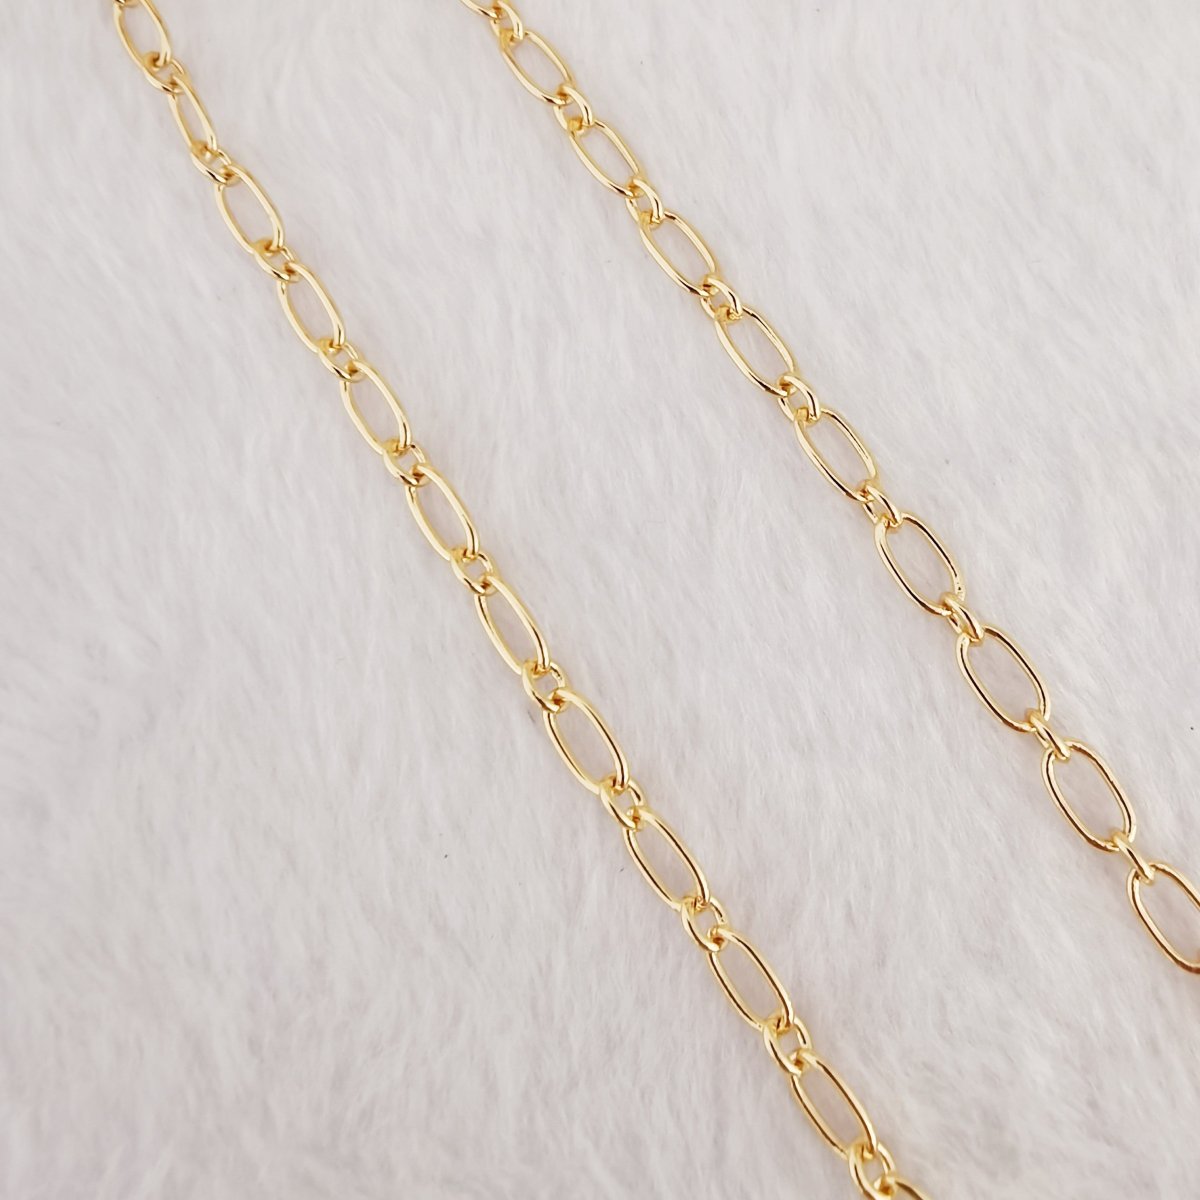 24K Gold, 18K Gold, White Gold Filled CABLE Roll Chain For Jewelry Making, For Necklace Bracelet Anklet Supply Component | ROLL-478(XP-006), ROLL-480(XP-008), ROLL-483 (XP-011) Clearance Pricing - DLUXCA